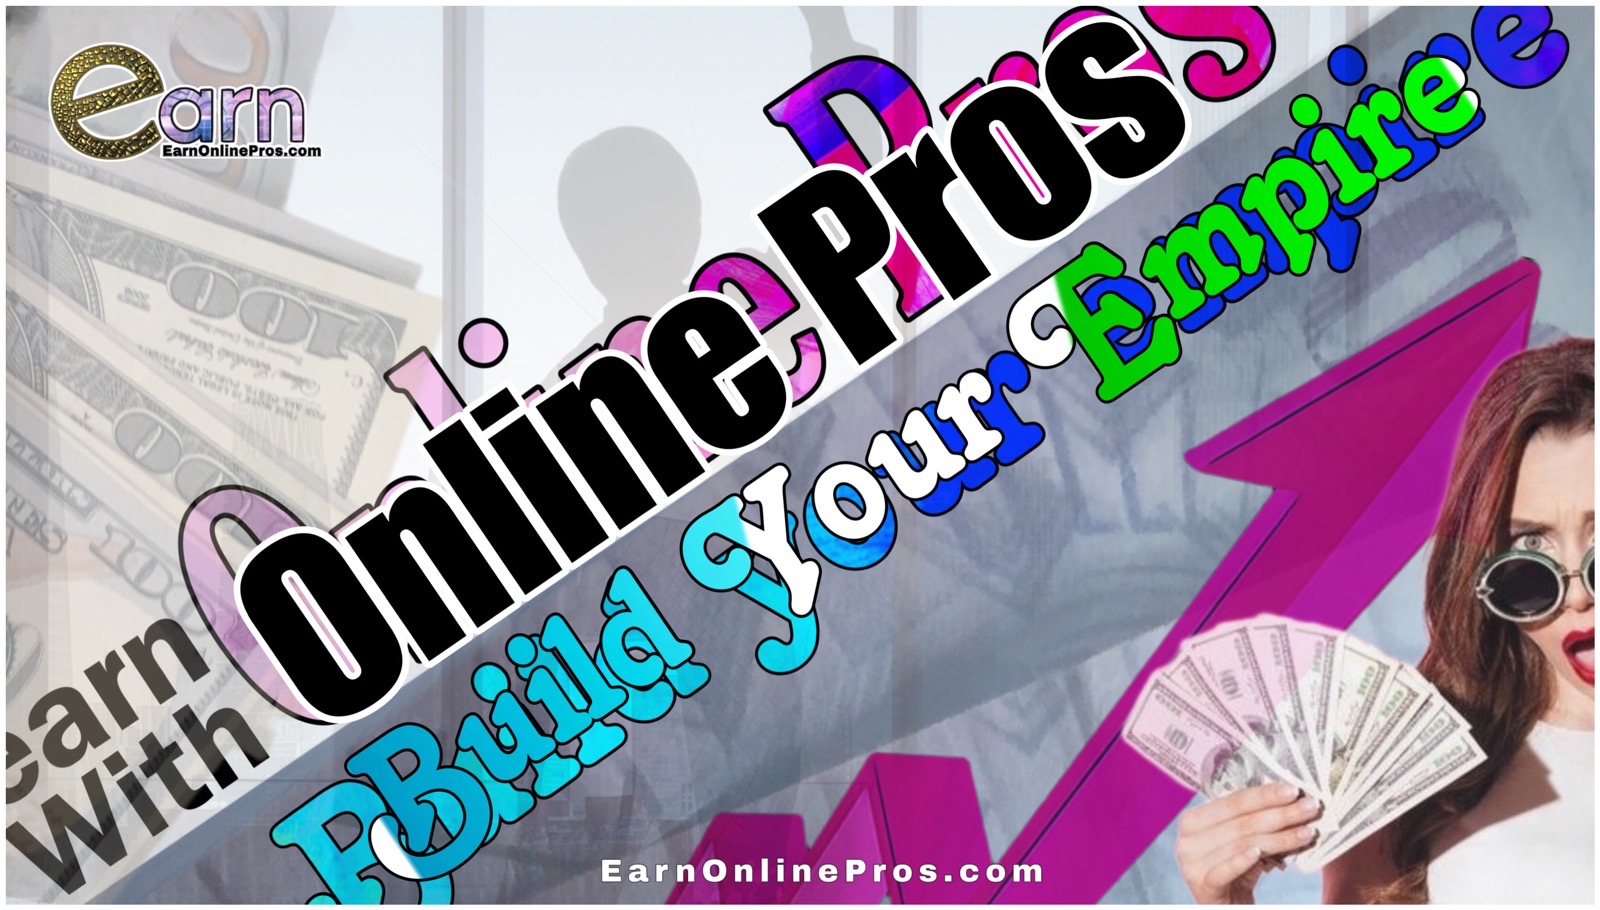 Build Your Empire With Earn Online Pros